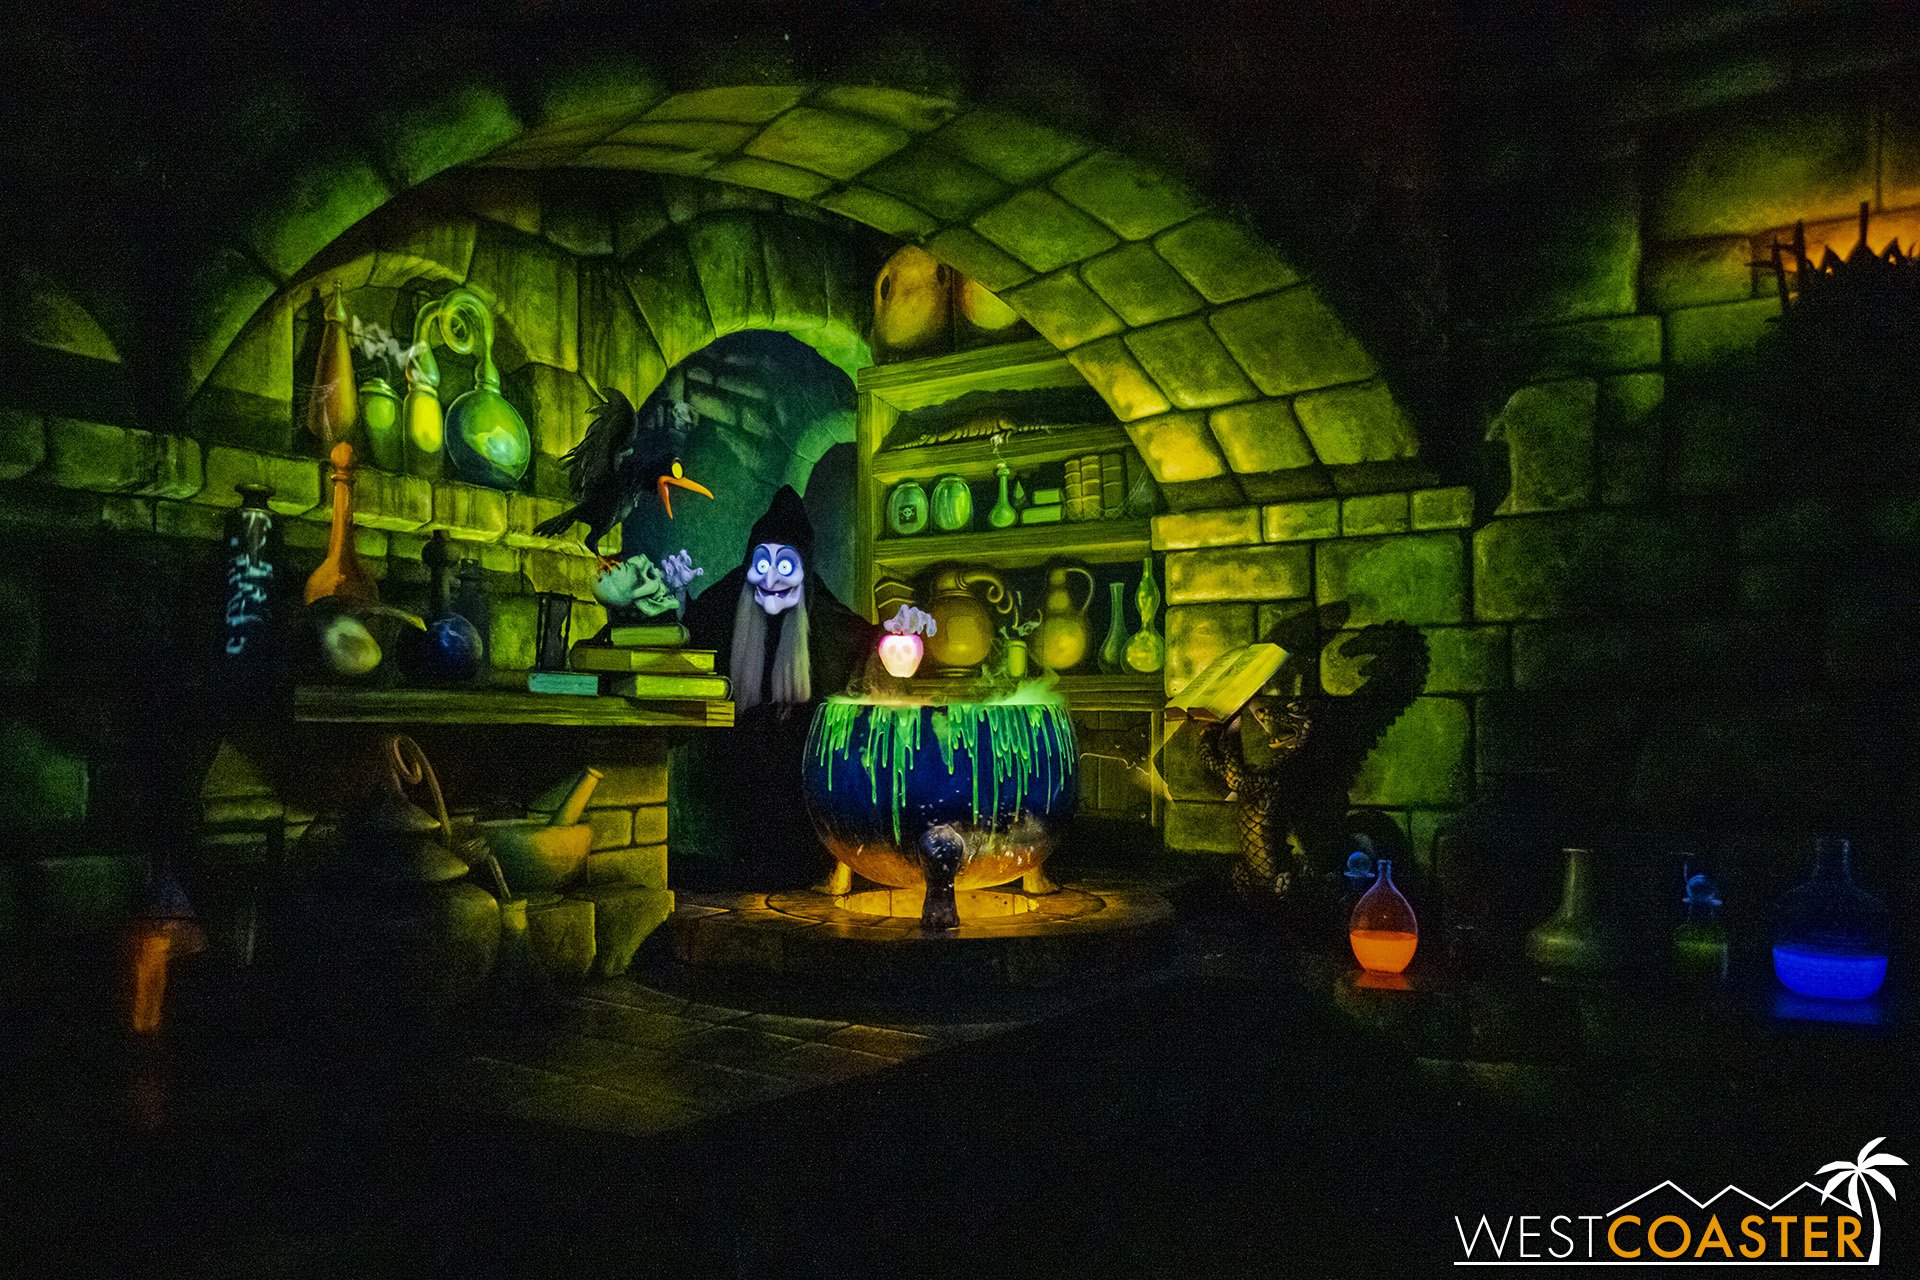  The classic Old Hag offering a poison apple remains and looks gorgeous with the refurbishment repainting! 